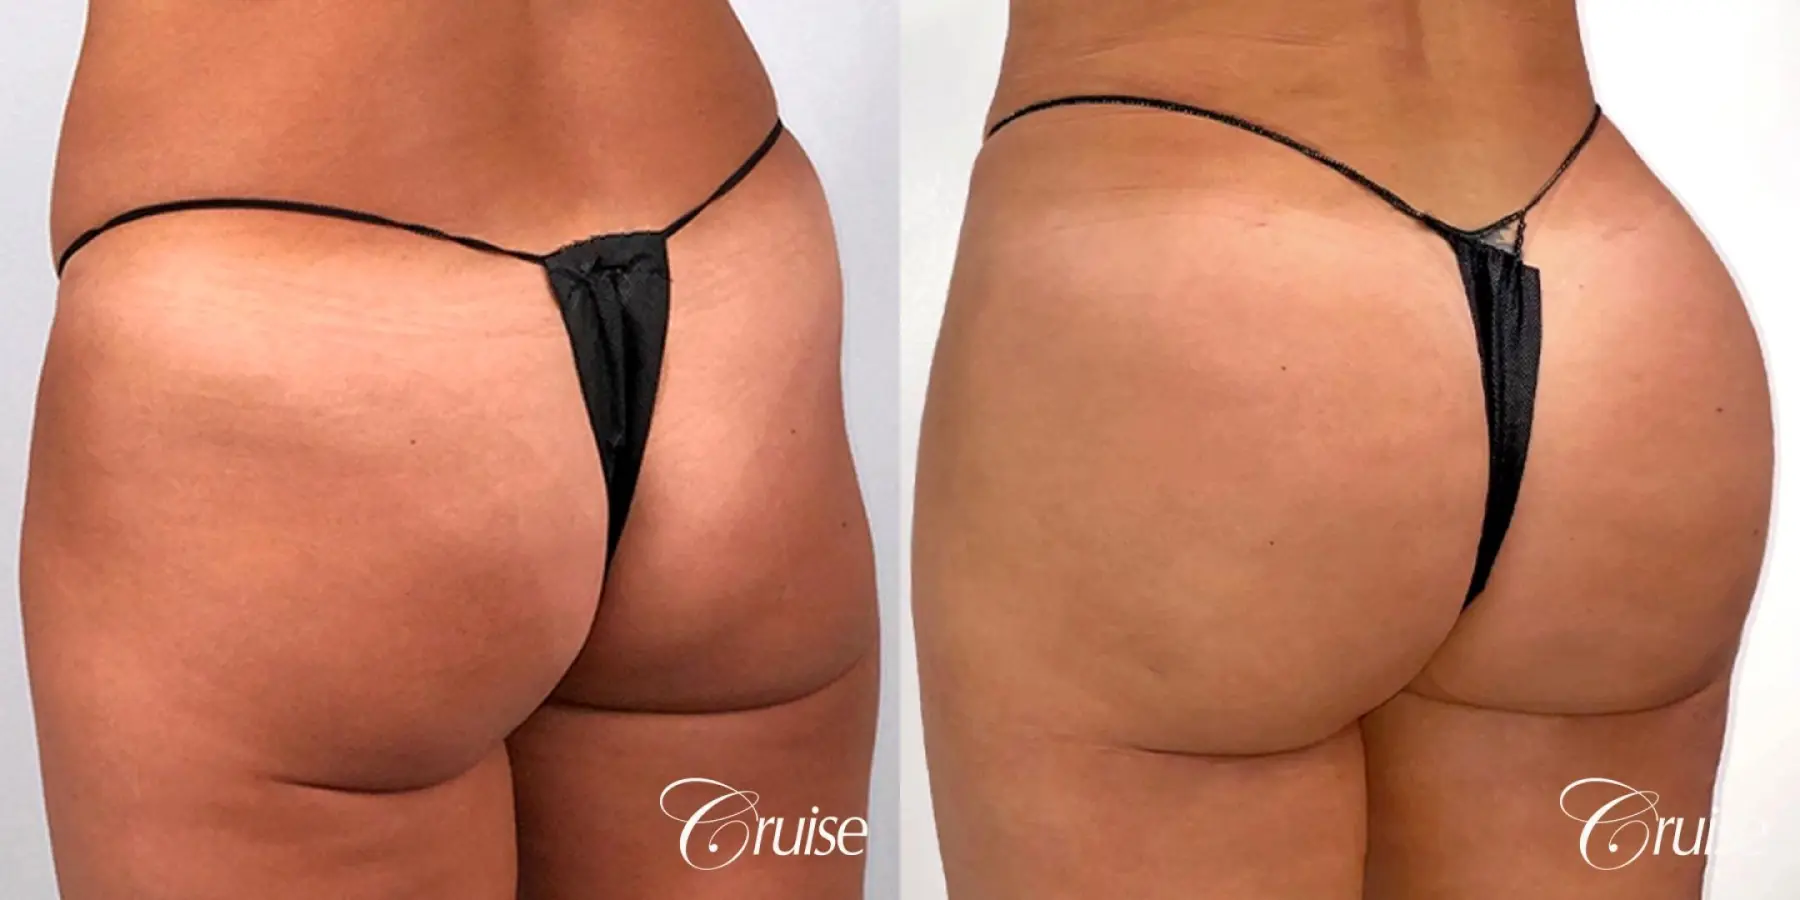 Brazilian Butt Lift with Liposuction to Stomach & Flanks - Before and After 2